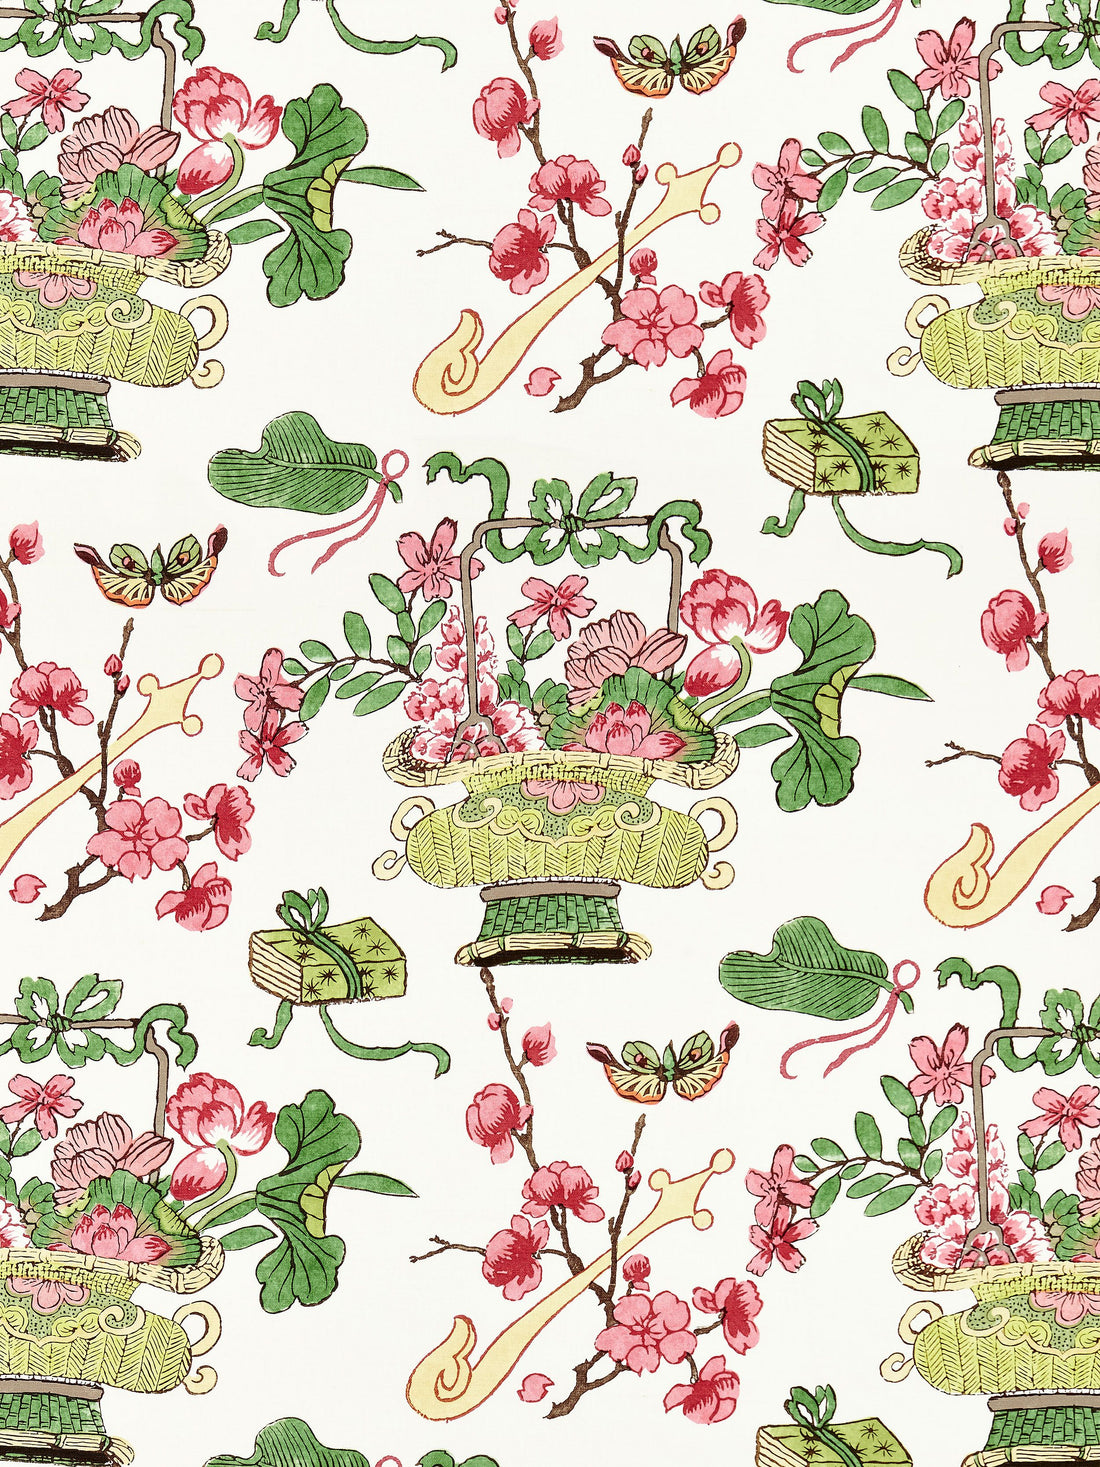 Shanghai Blossoms fabric in spring color - pattern number SC 000116591 - by Scalamandre in the Scalamandre Fabrics Book 1 collection